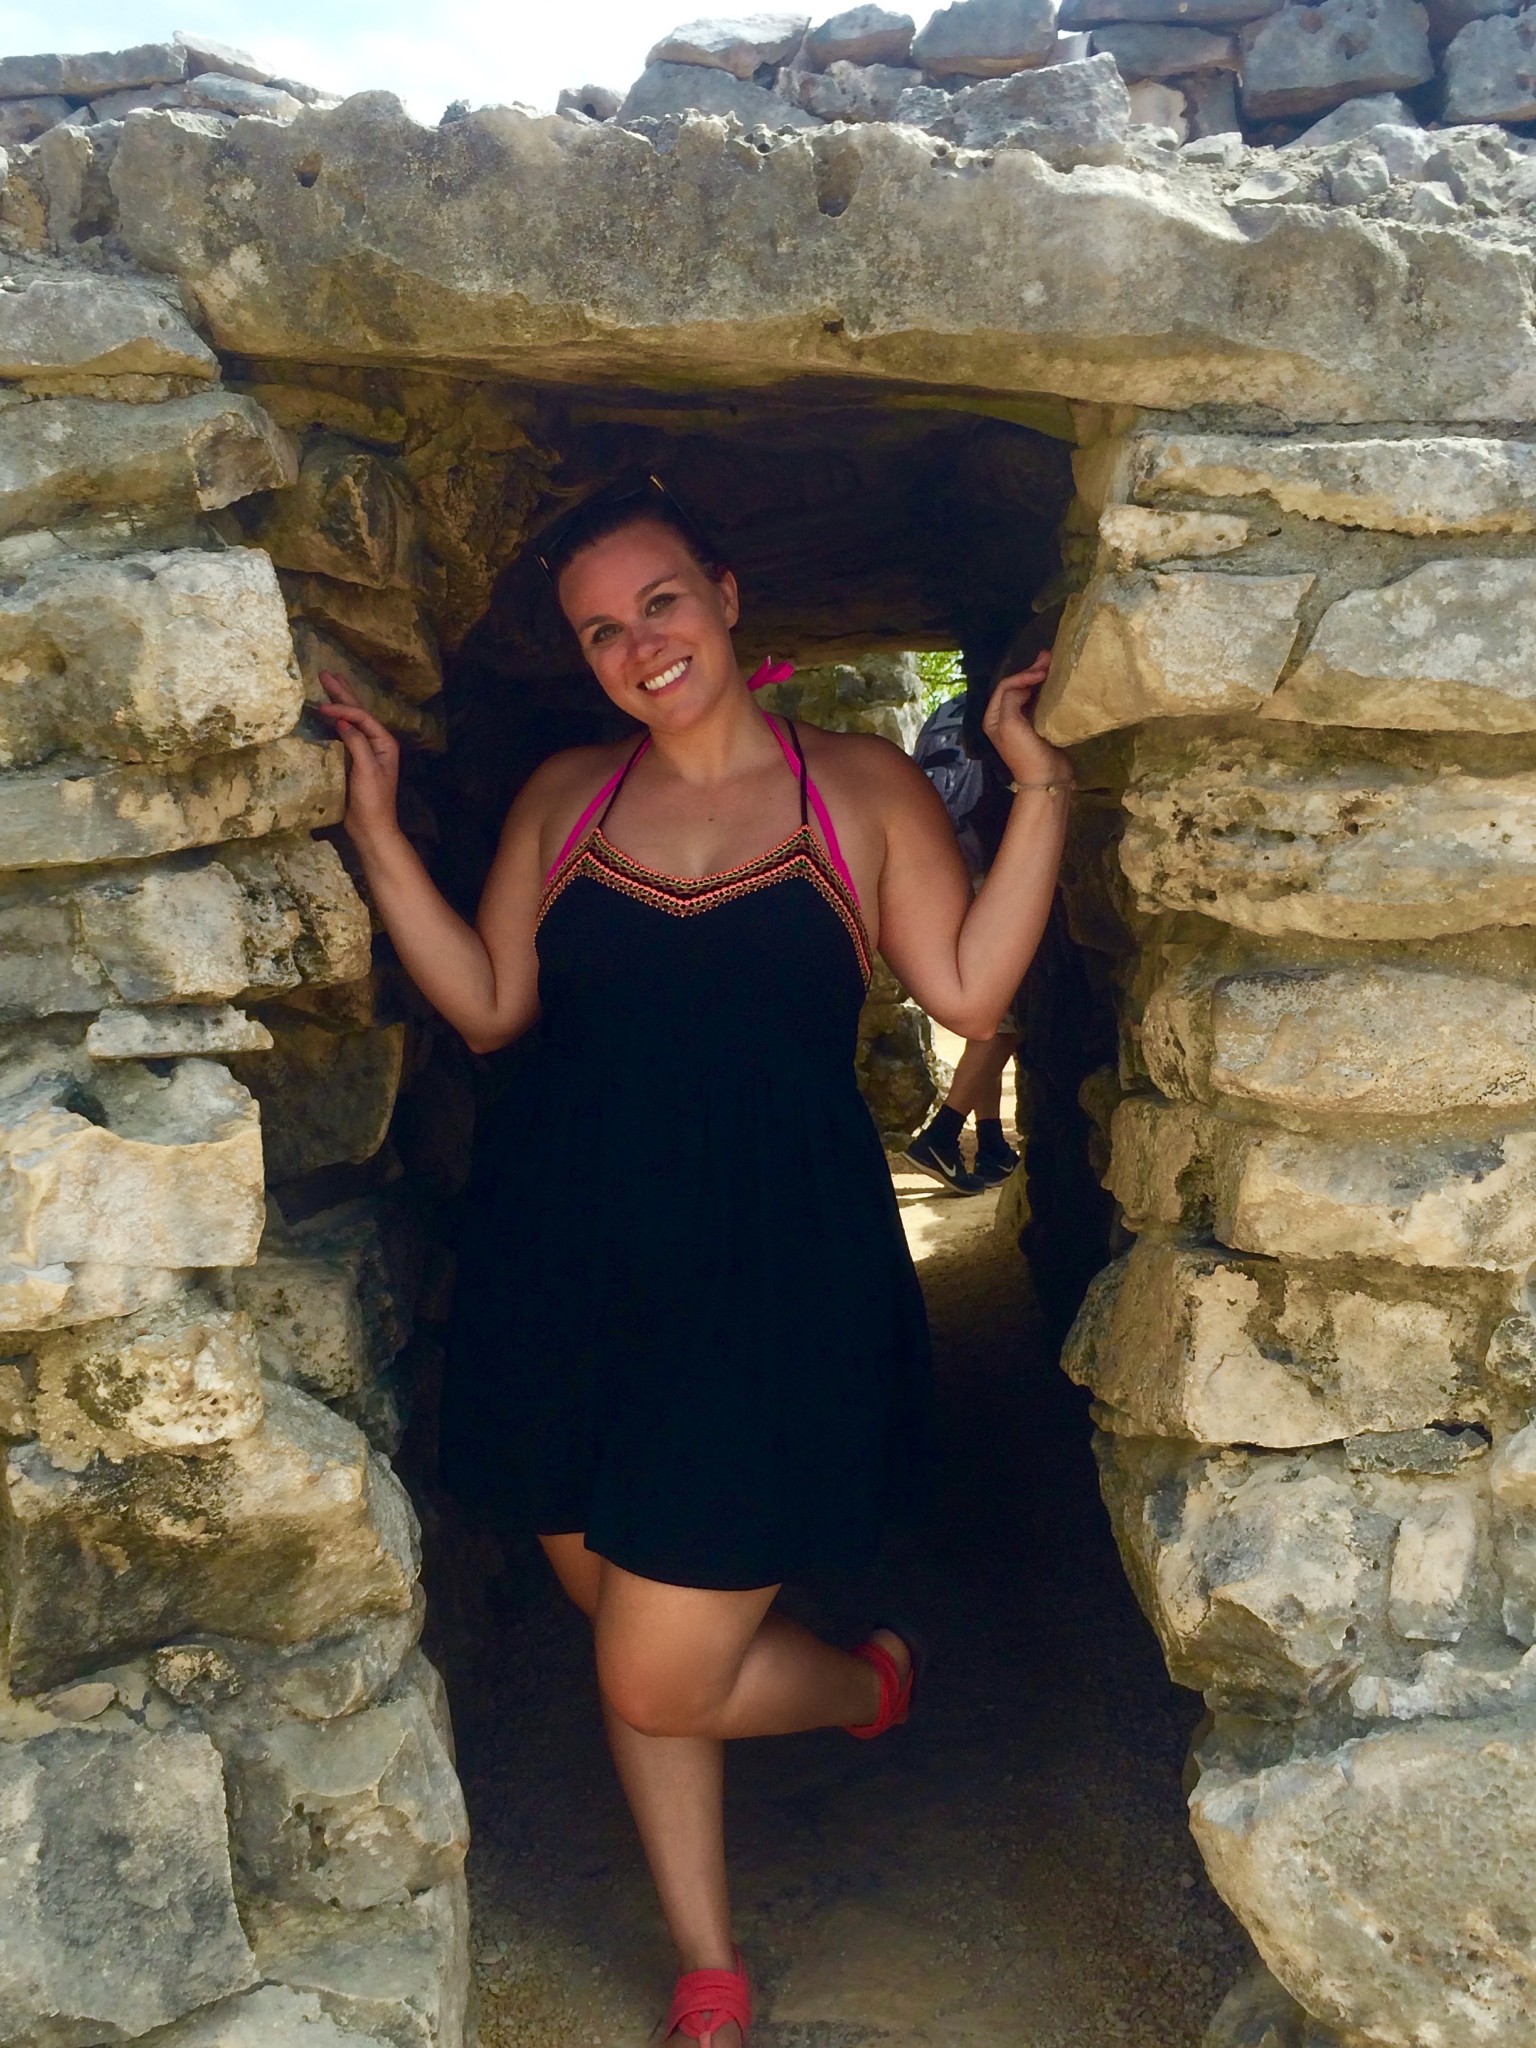 What to do in Playa Del Carmen, Mexico – Visiting Ruins